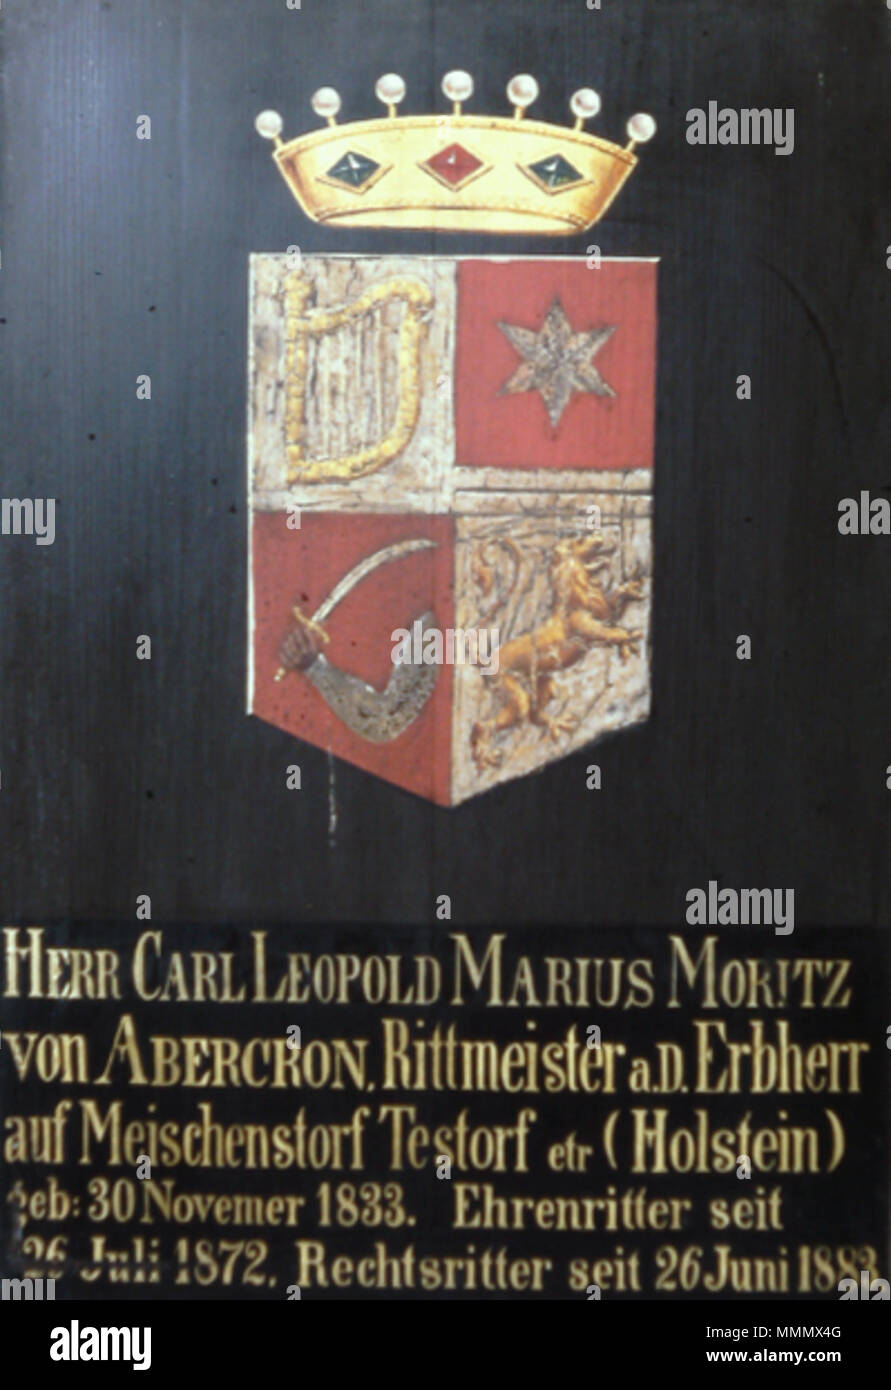 . English: Die Rechtritter Carl von Abercron von Abercron, Carl Leopold Marius Moritz Rittmeister a. D. Erbherr auf Meischenstorf (*1833 - ???1913) - ER 1872, RR 1883   . 16 March 2018. Written permission from the Antiquarian-Typographic Archiv, ATA at The Swedish Heritage Board to publishing the images. The image is published ISBN 978-91-982375-1-1 RR Carl von Abercron Stock Photo